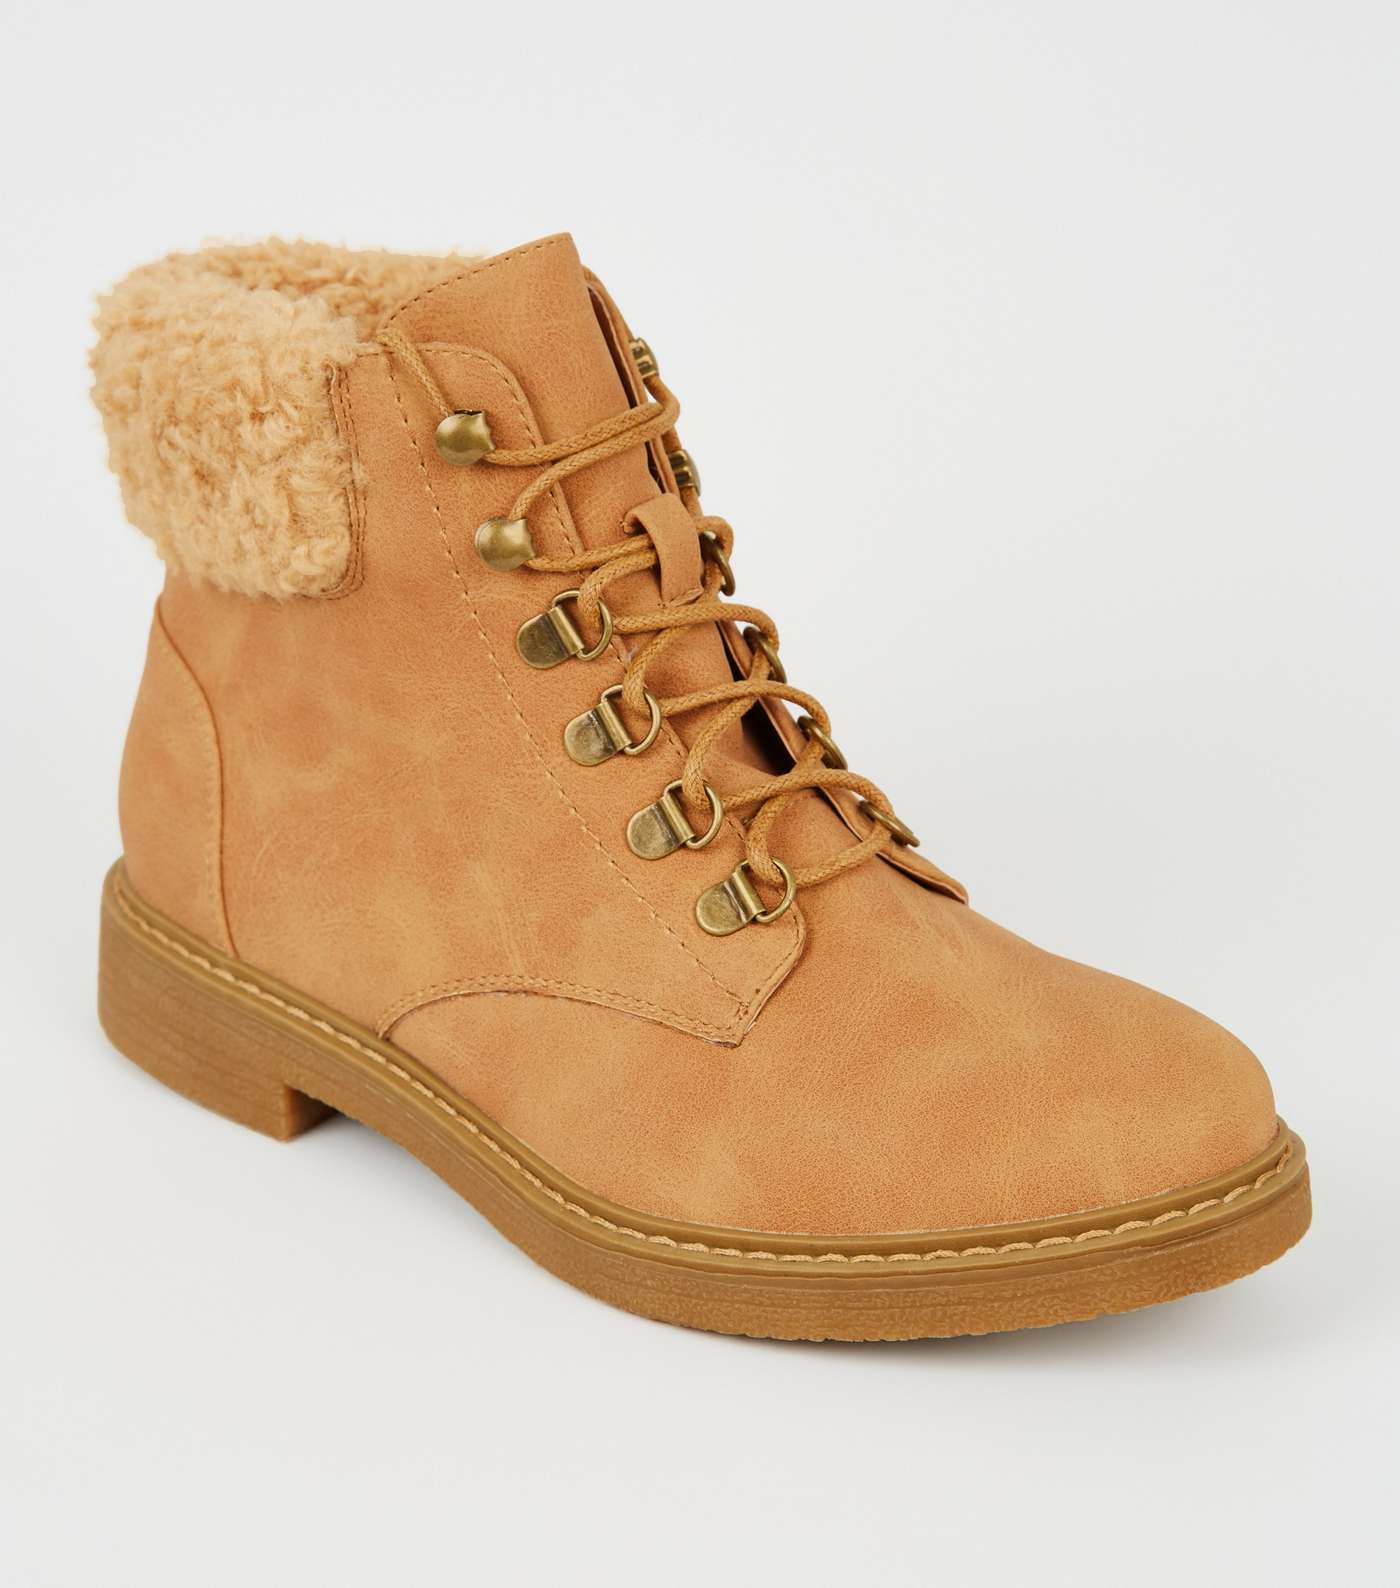 Girls Tan Teddy Trim Lace Up Boots